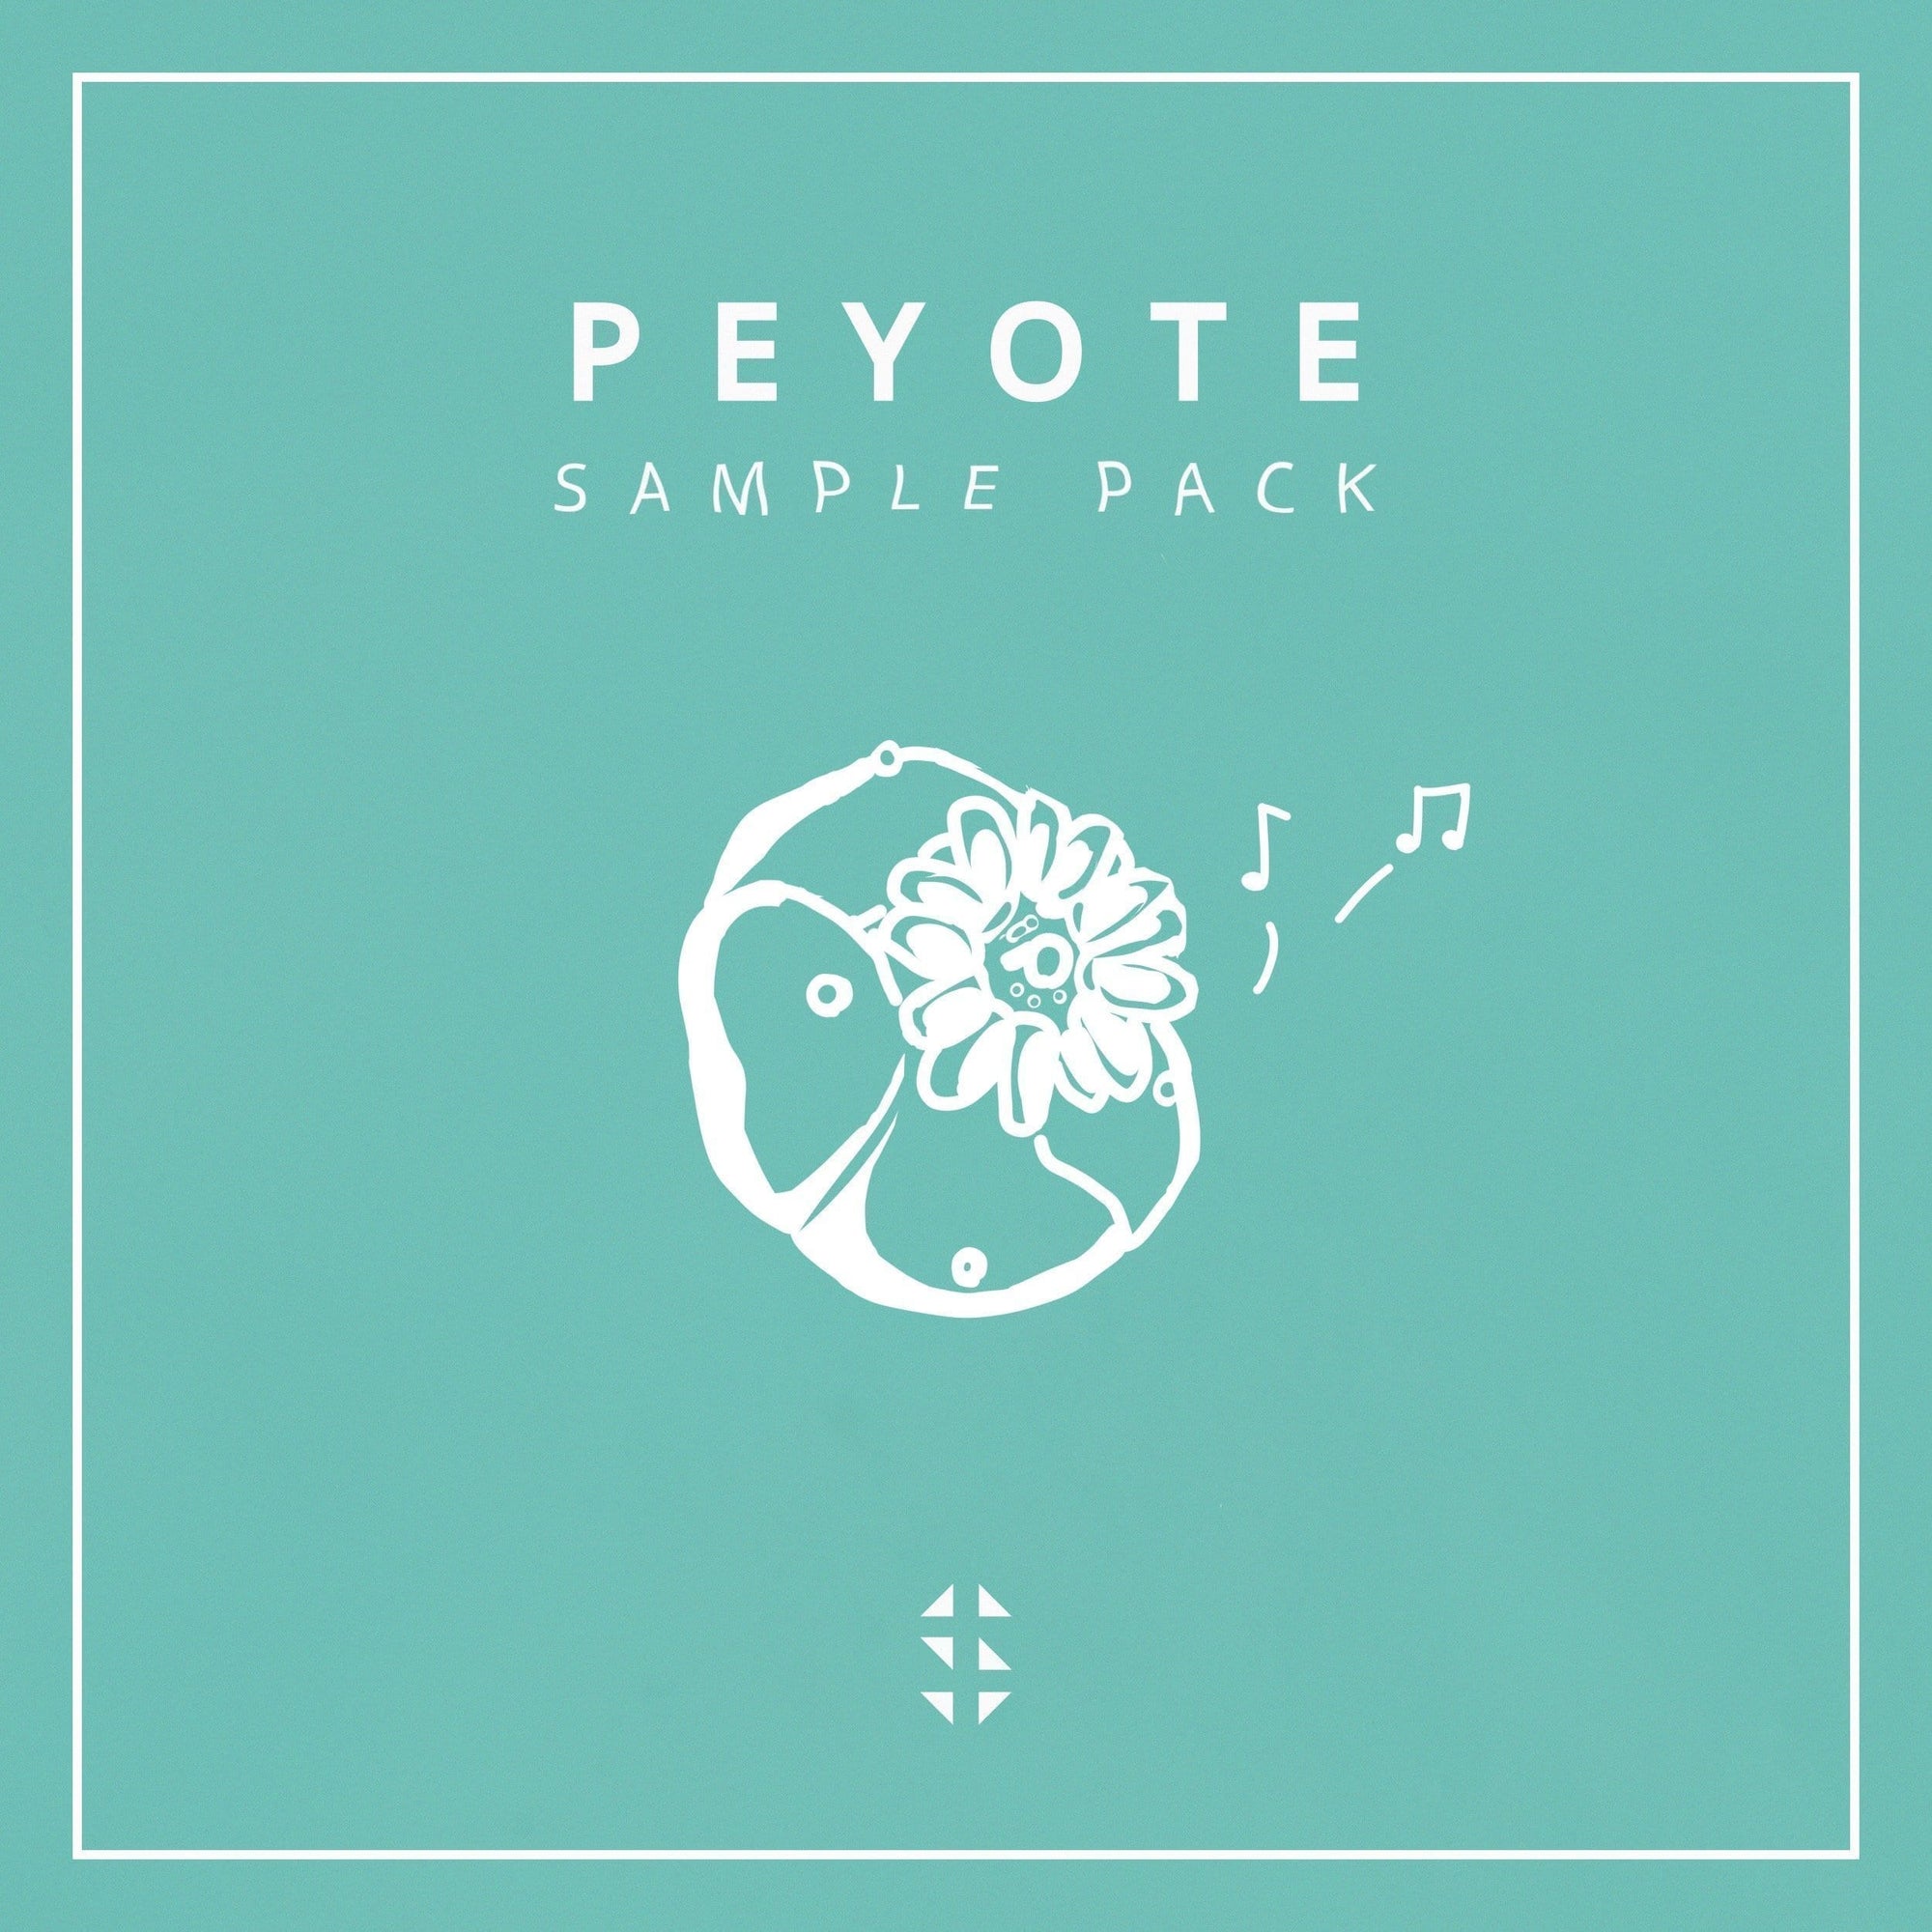 Ambient Sounds Sample Pack and Presets - Peyote Sample Pack Samplified 